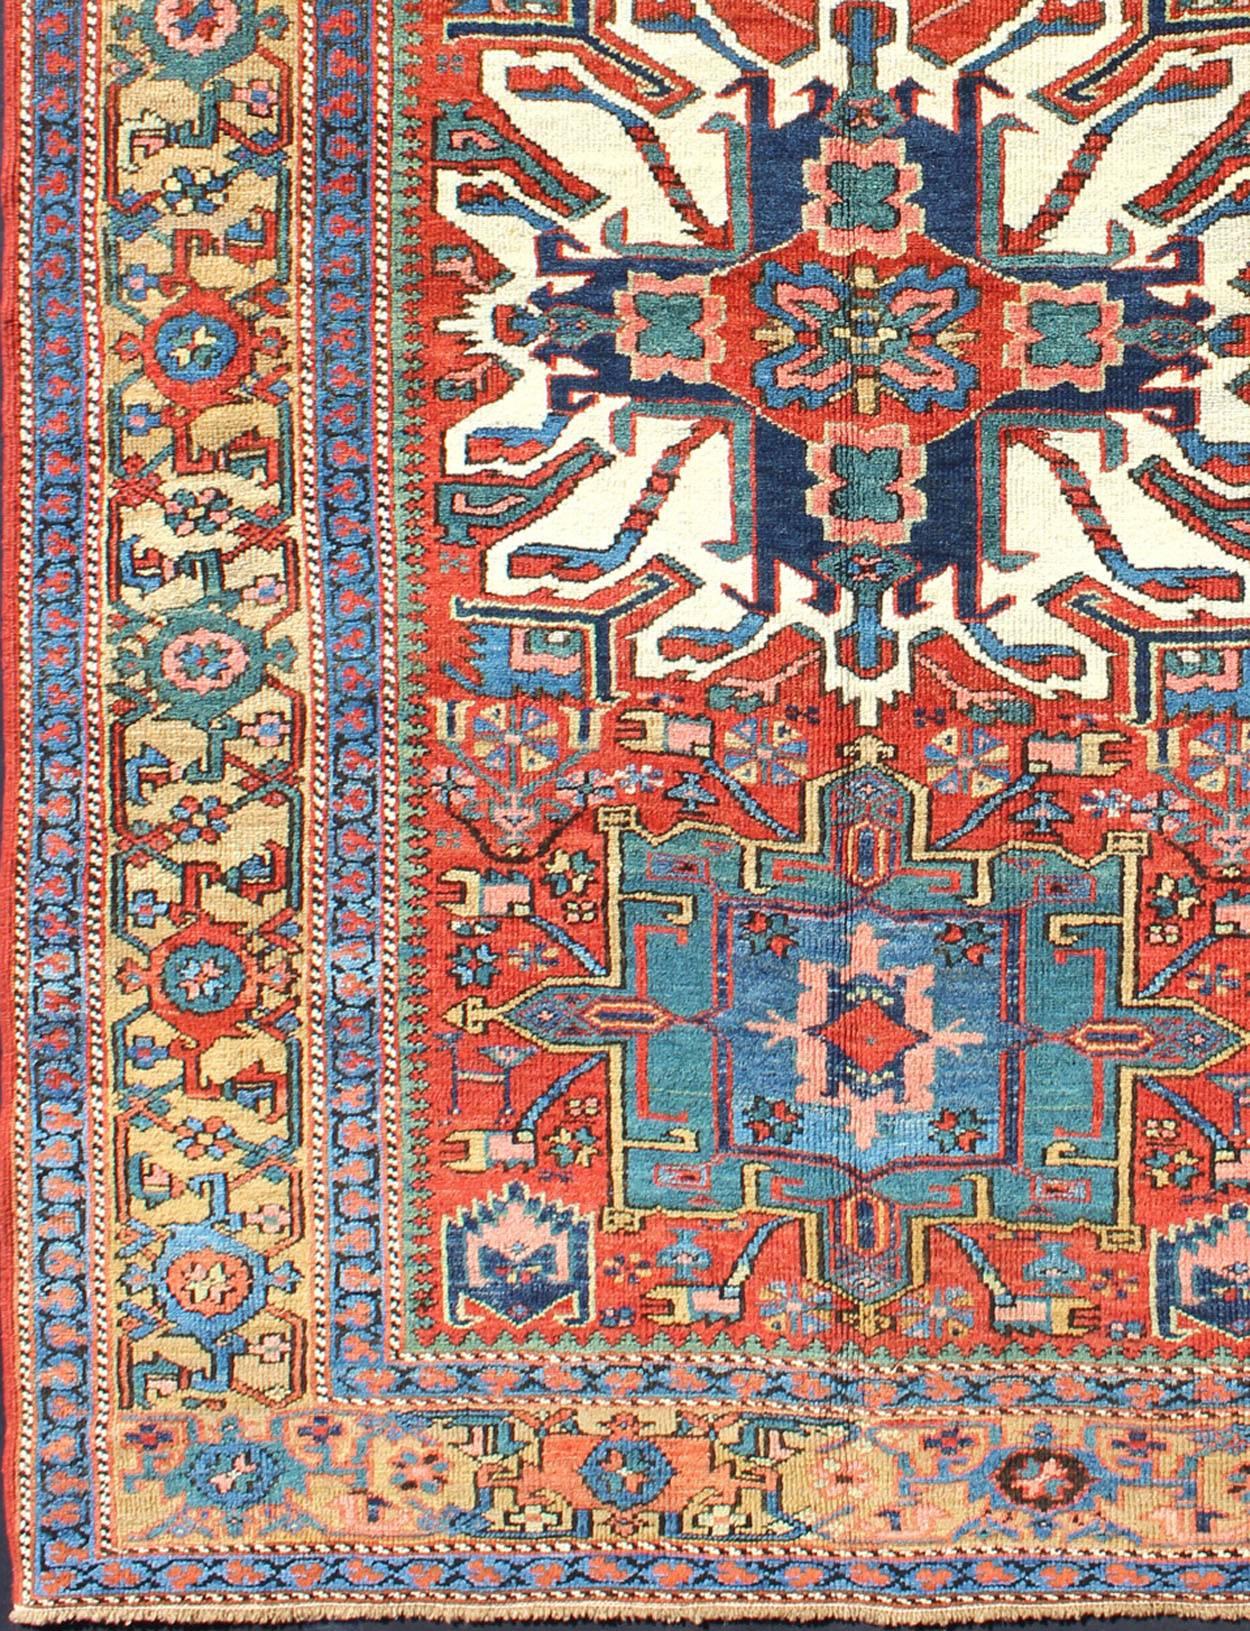  Measures: 4'7'' x 6'10''.
Established with luxurious jewel tones, this finely woven antique Serapi-Karajeh carpet from Persia is a striking piece. It is engagingly accented with a brilliant tangerine tone, which play off of the cool-toned